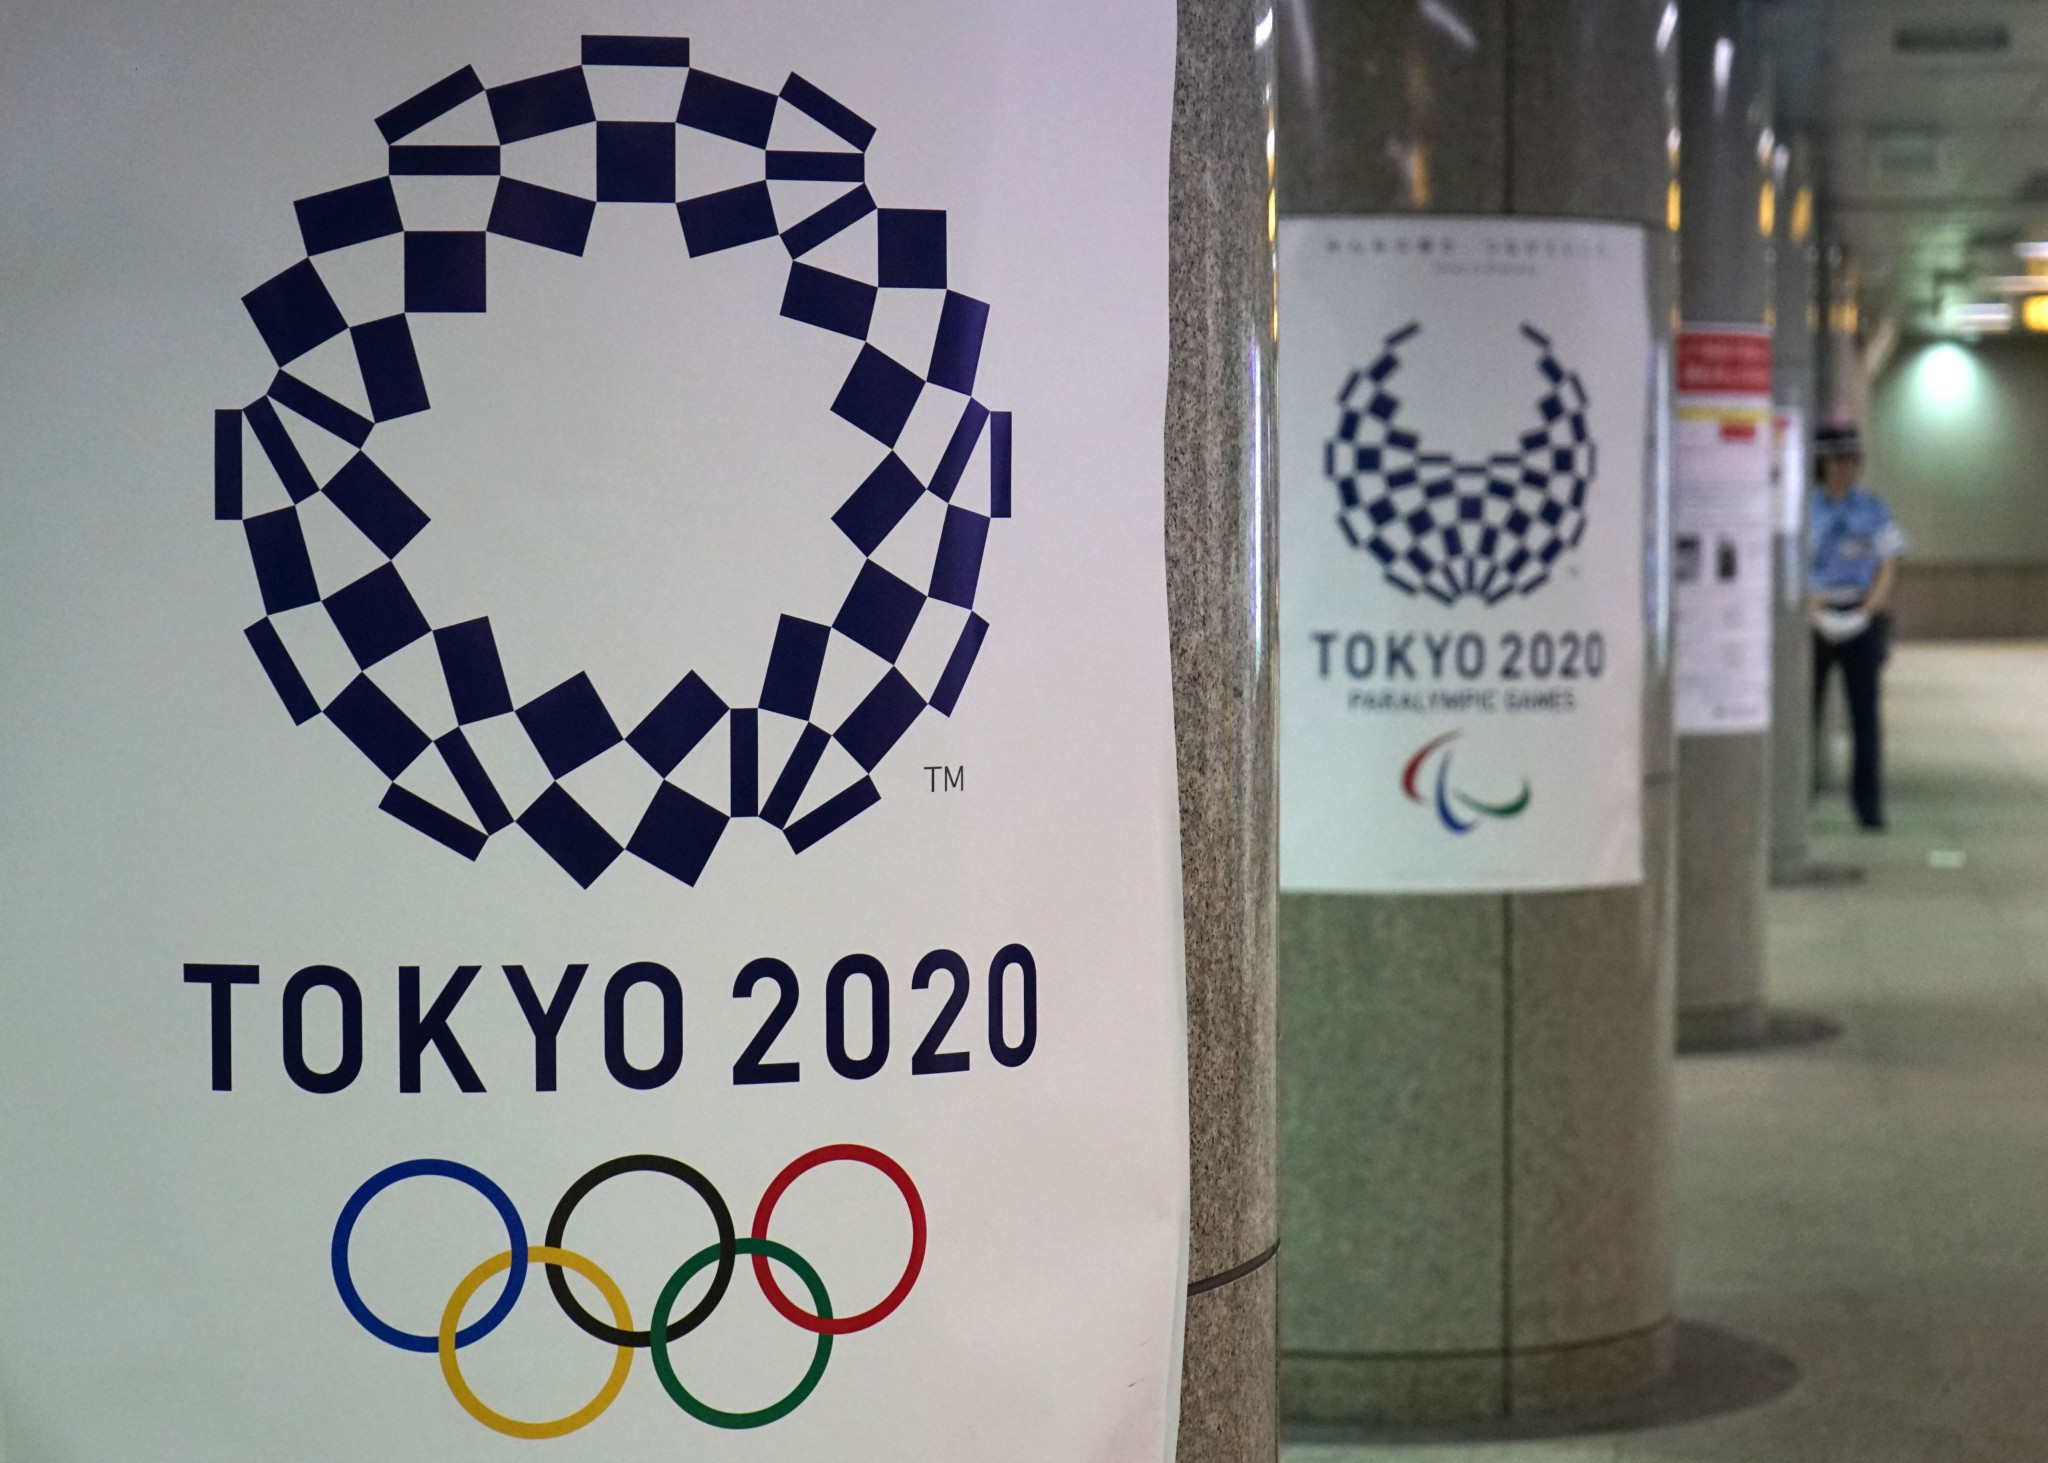 Tokyo 2020 announce no change to budget as third version revealed 